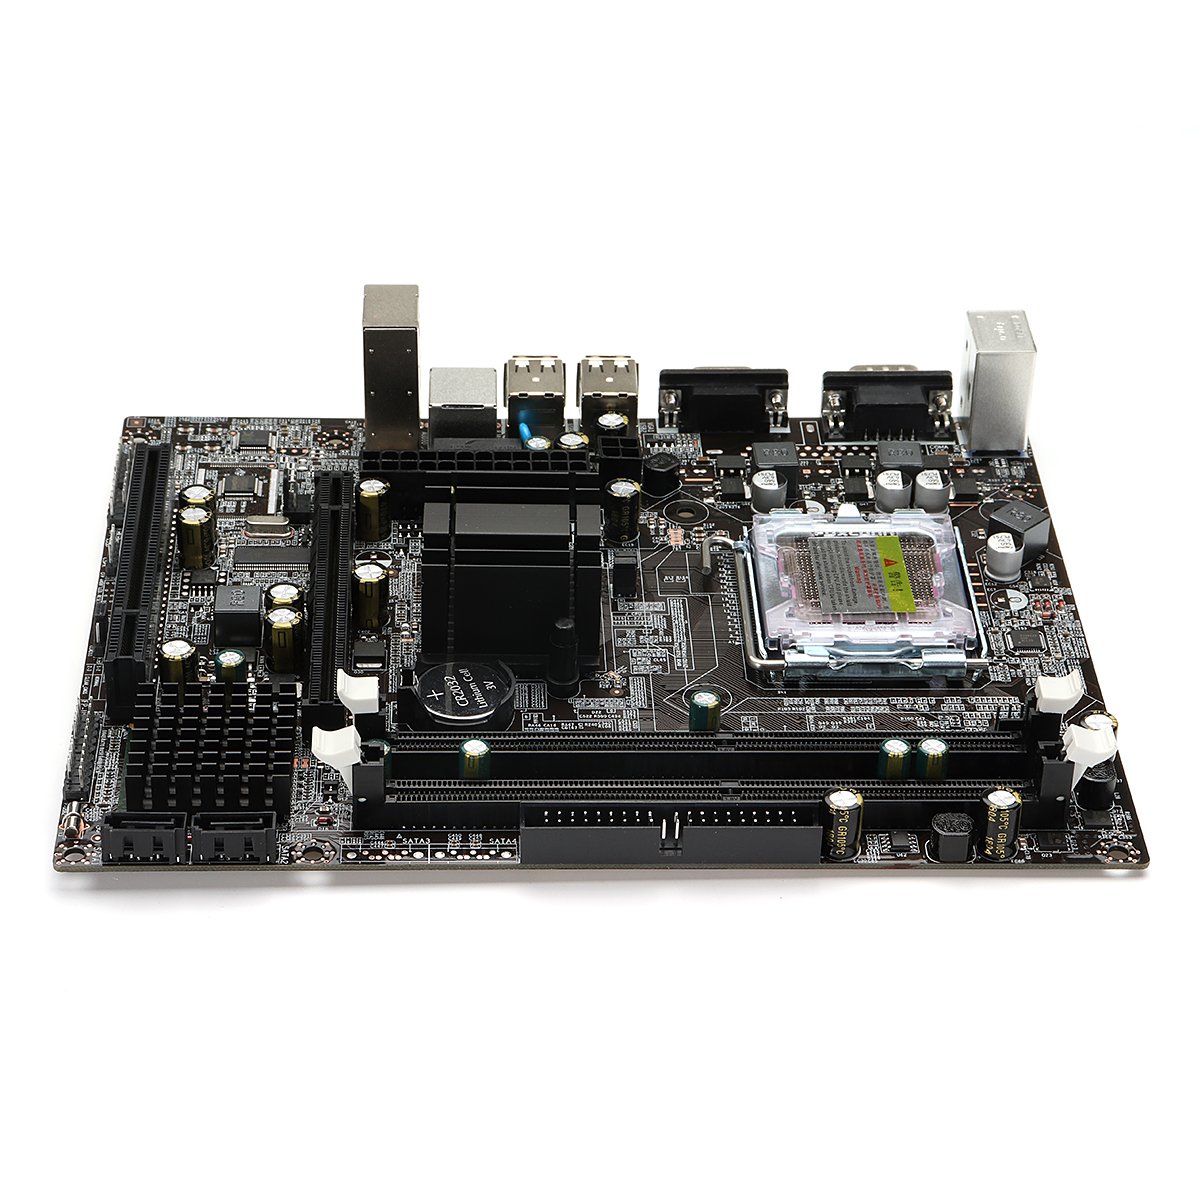 driver for intel nh82801gb motherboard